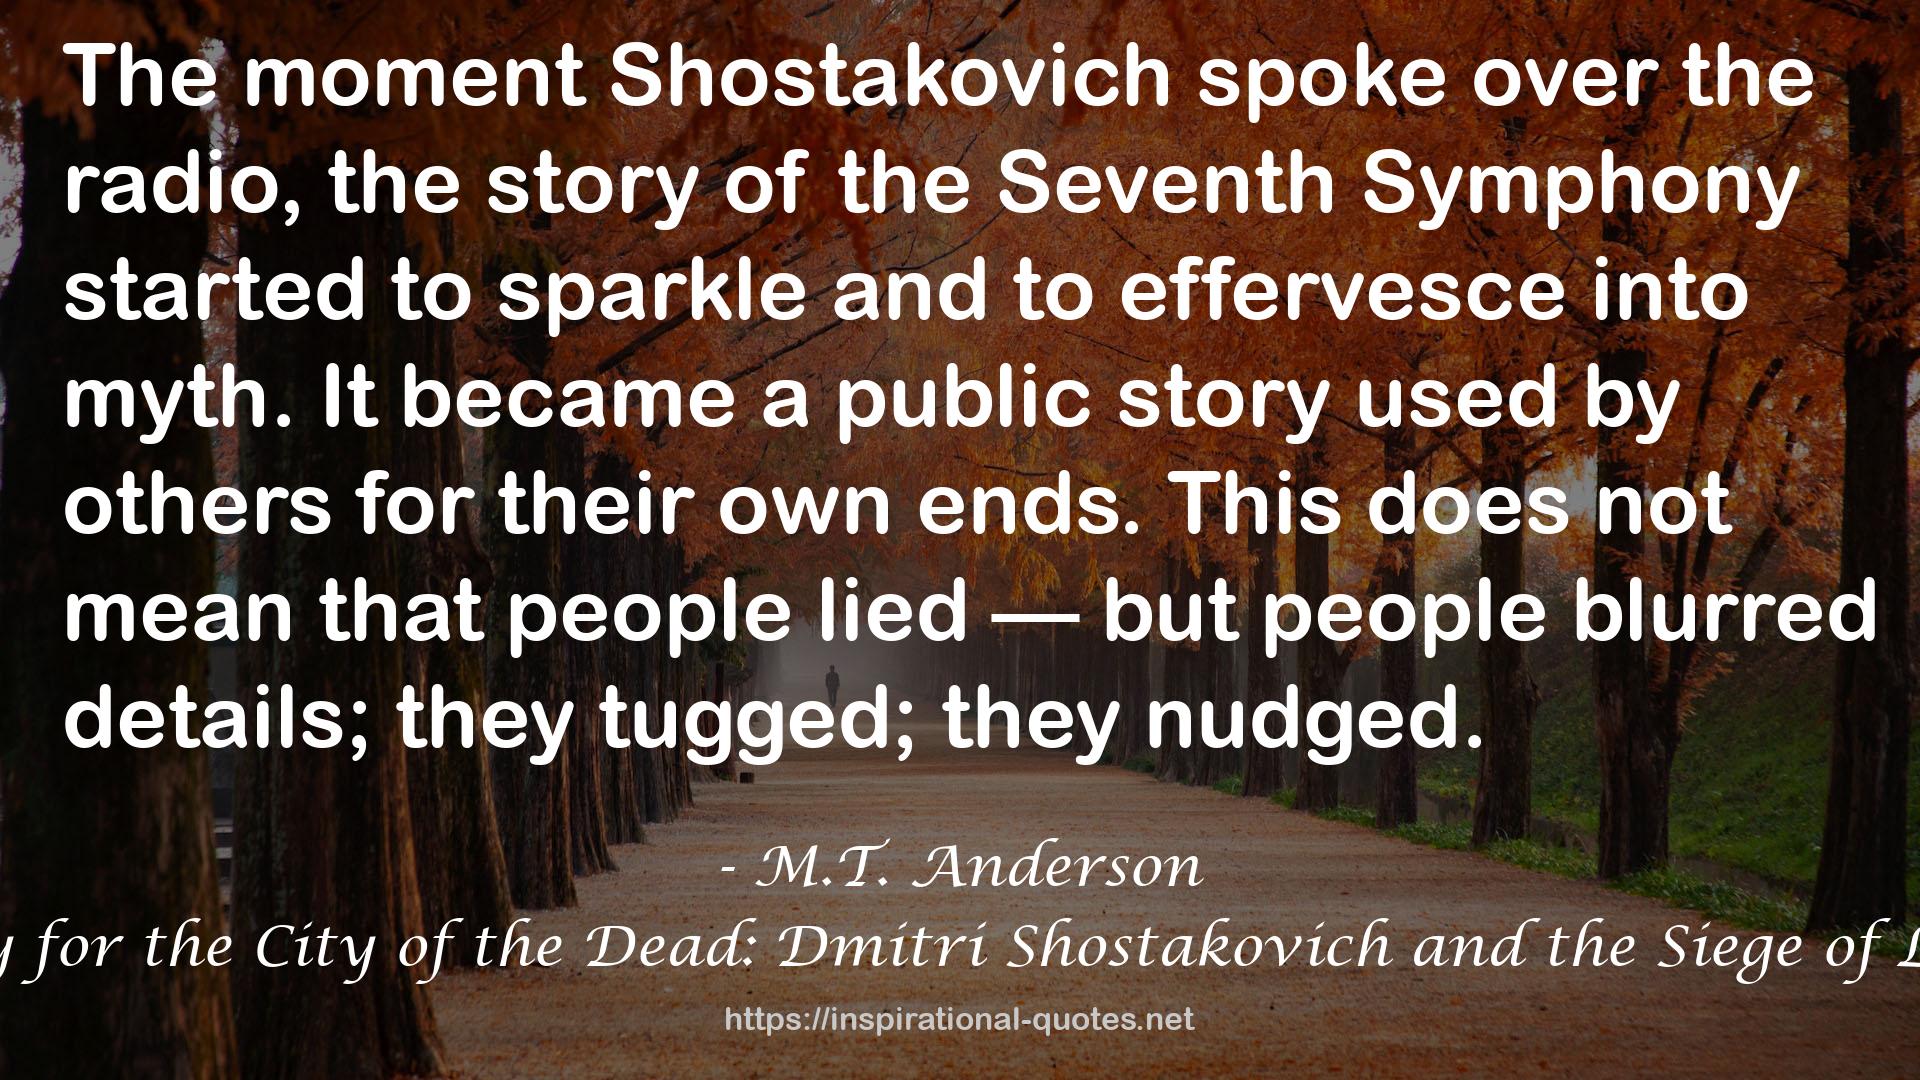 Symphony for the City of the Dead: Dmitri Shostakovich and the Siege of Leningrad QUOTES